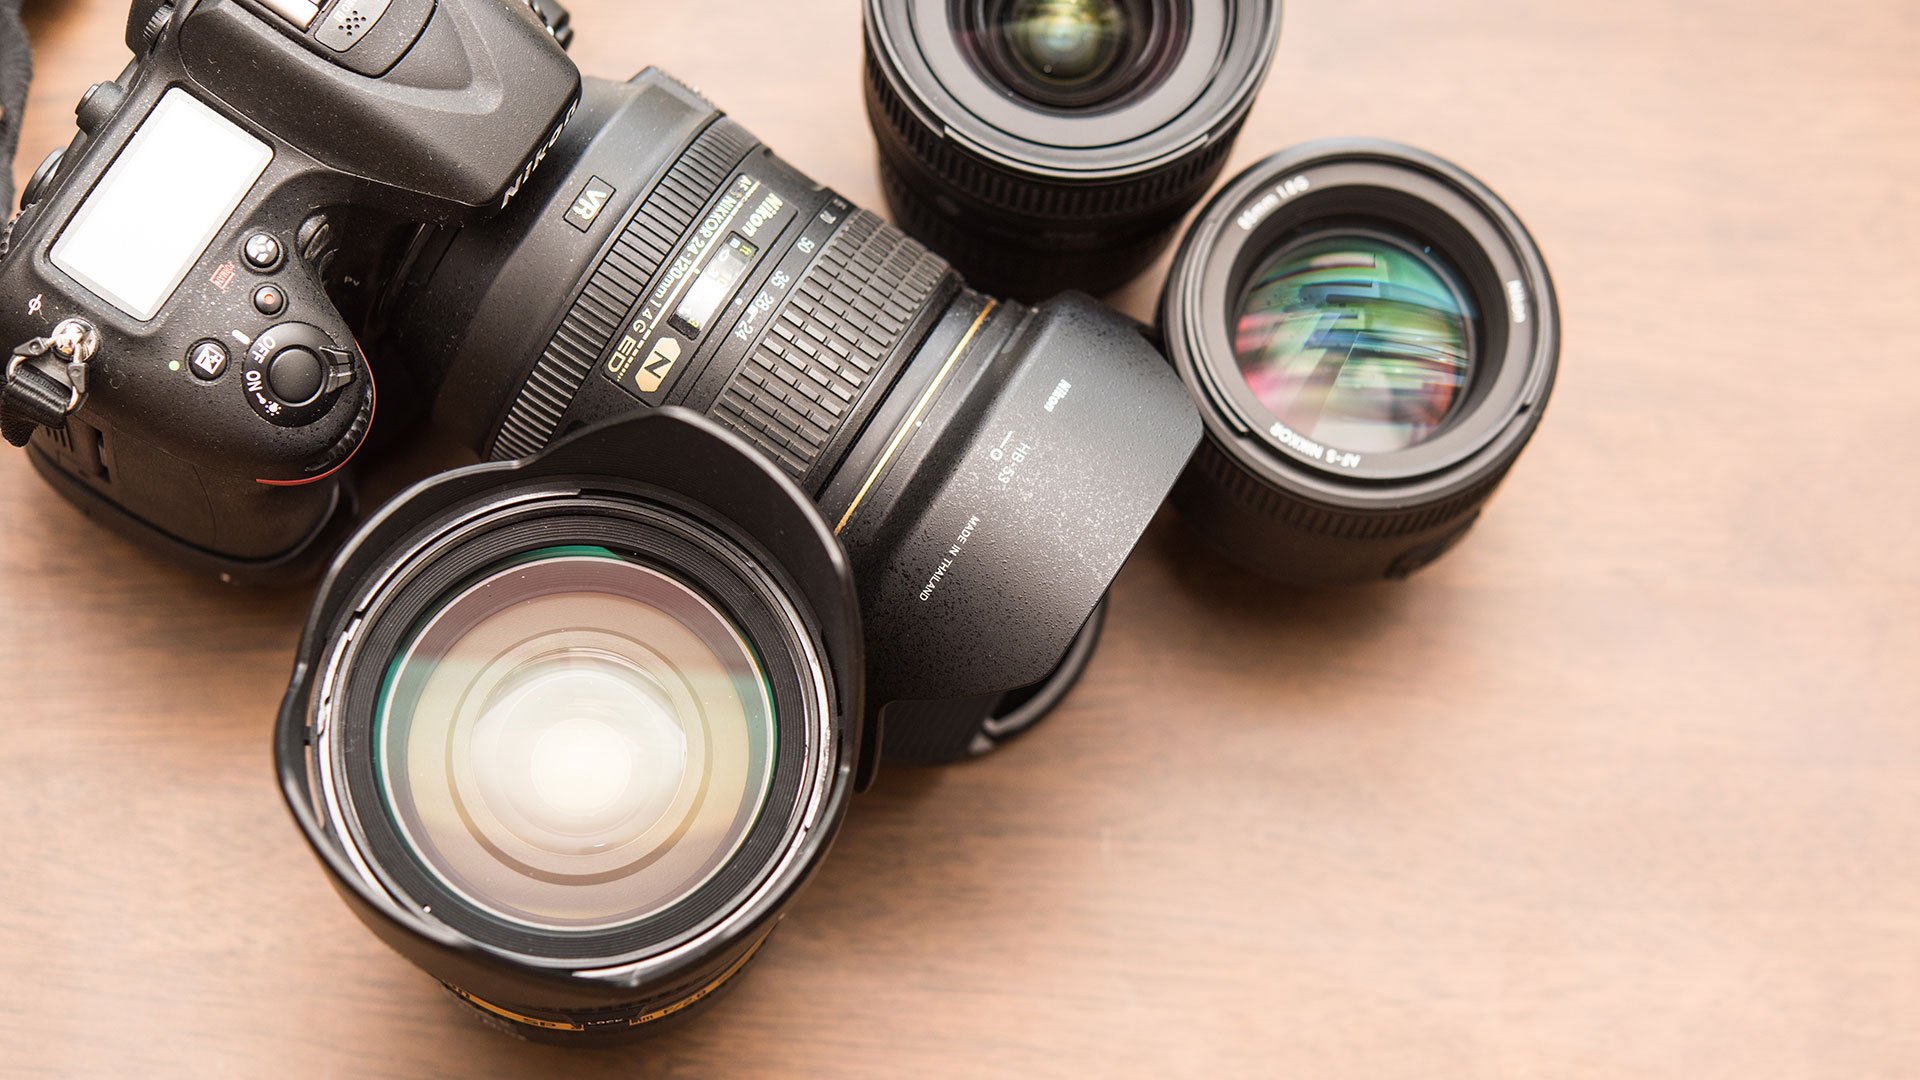 Photography 101: The difference between fixed and variable aperture